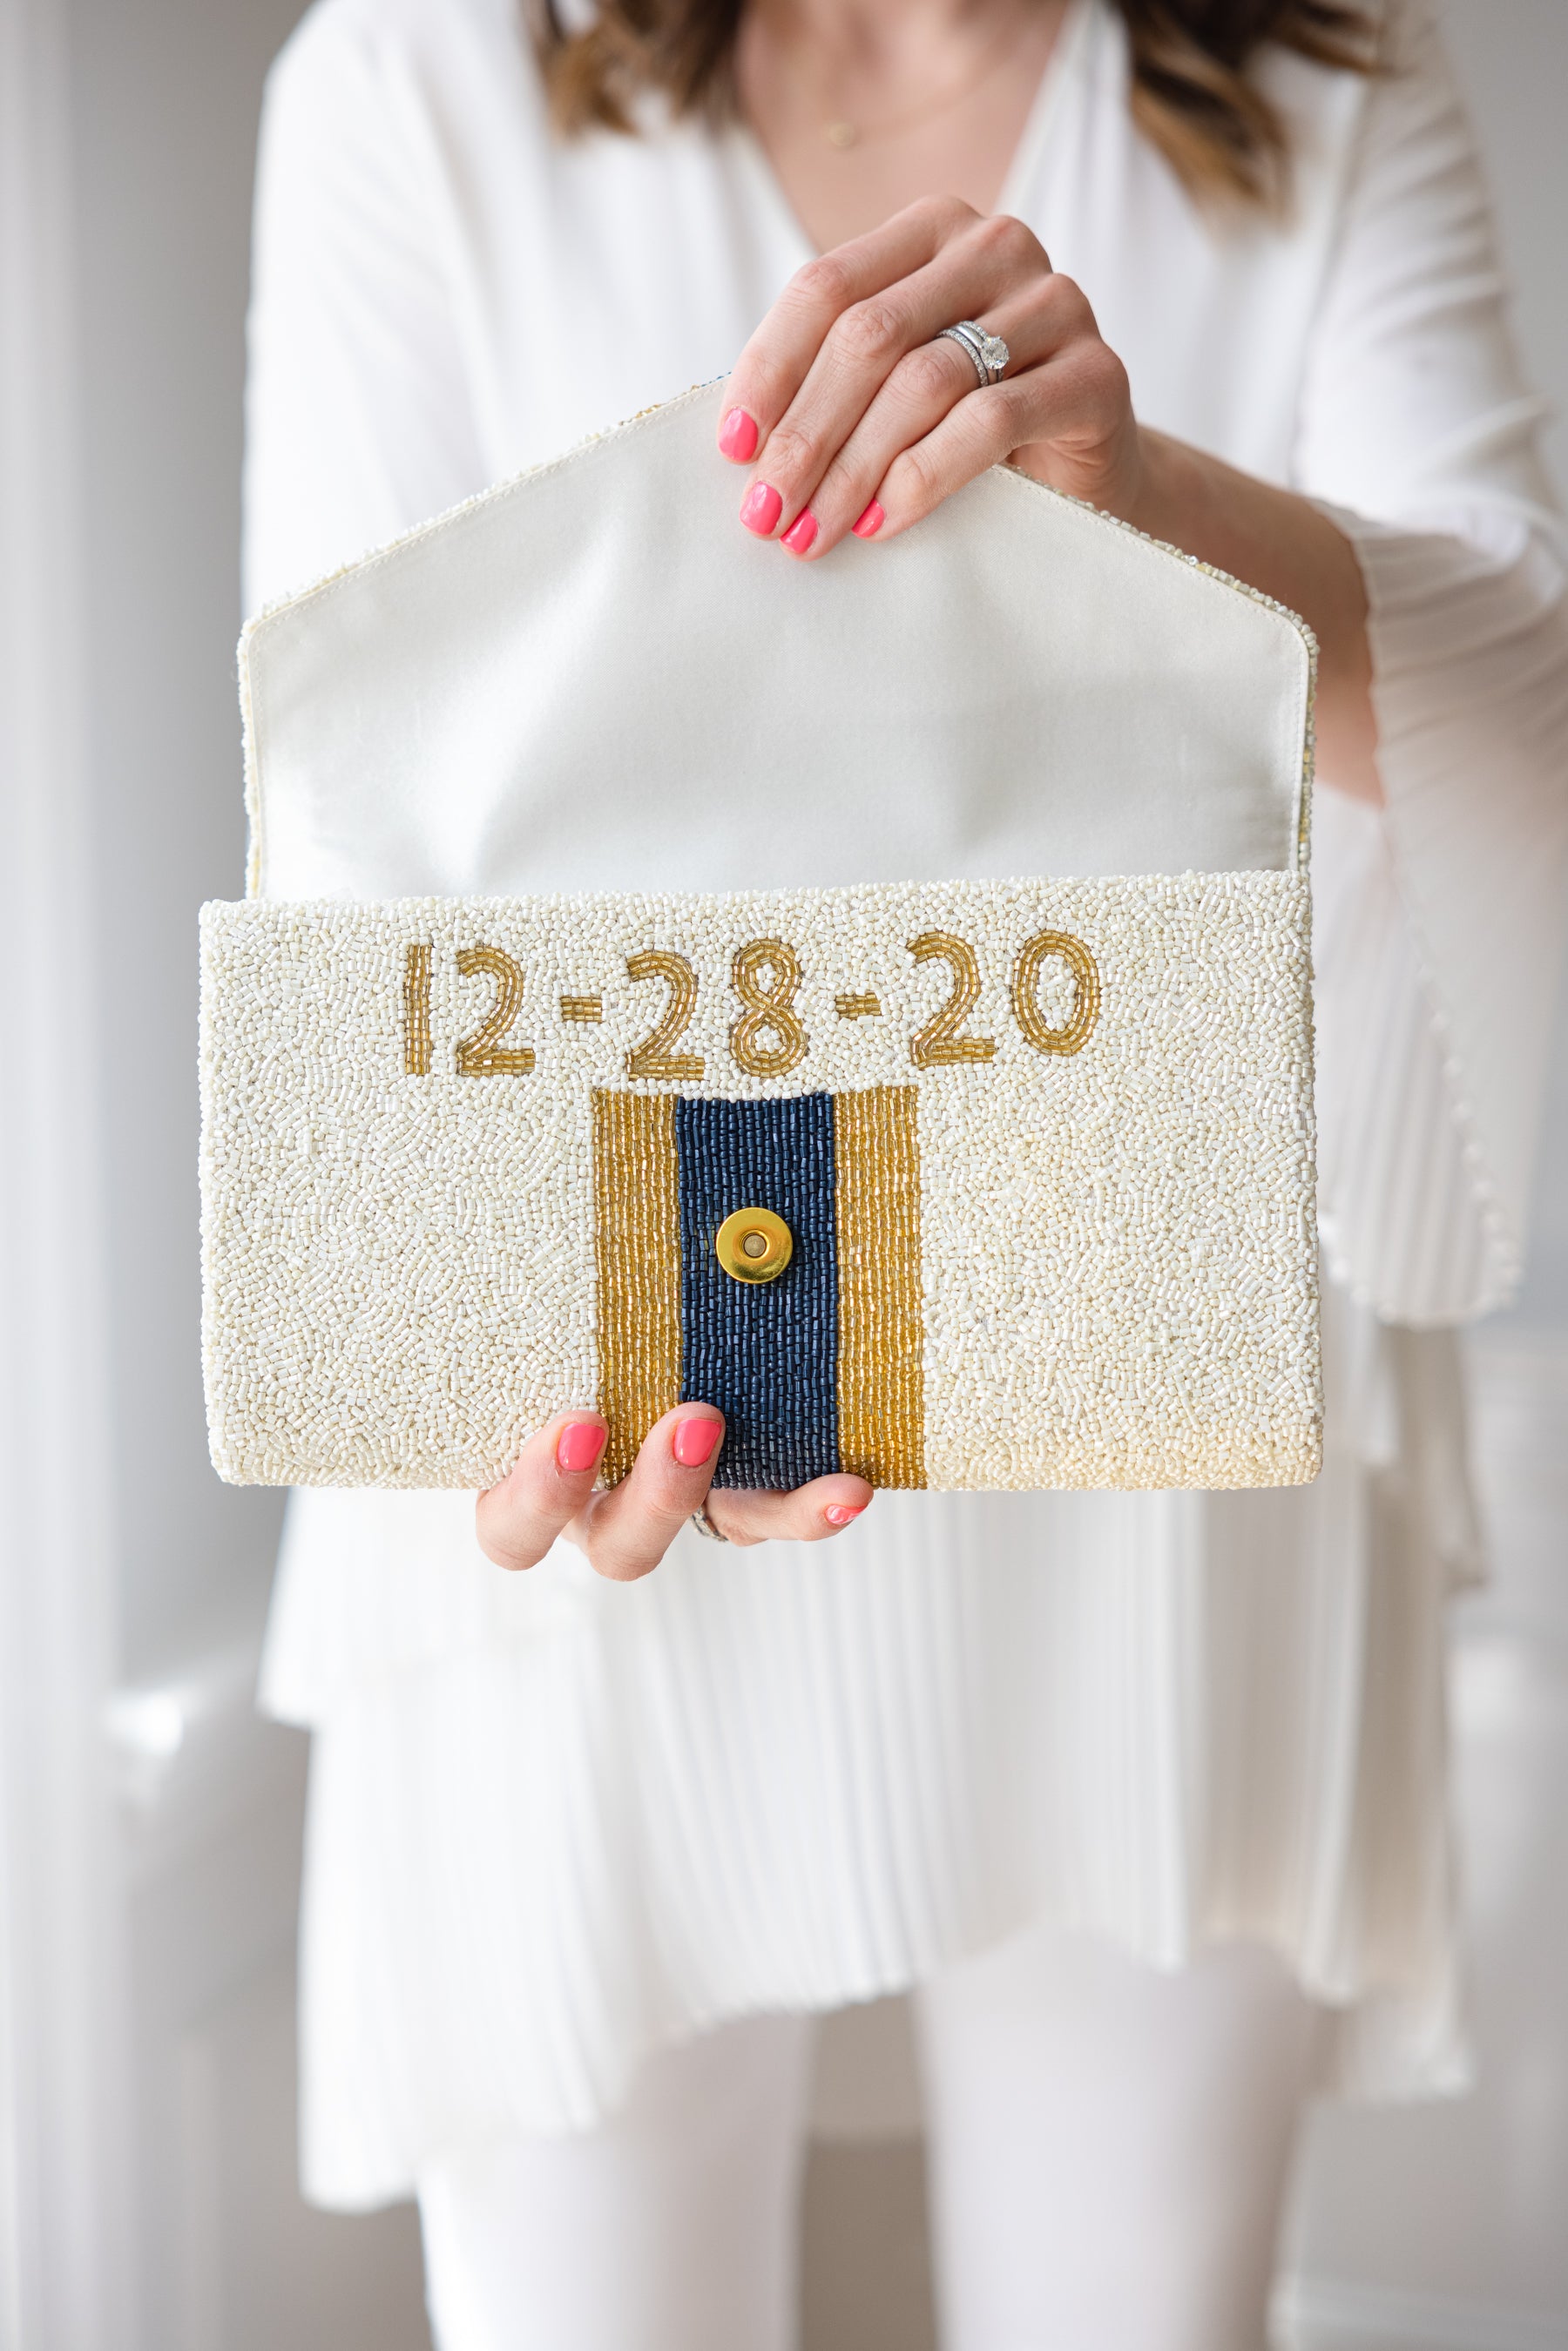 custom beaded monogrammed clutch with date inside